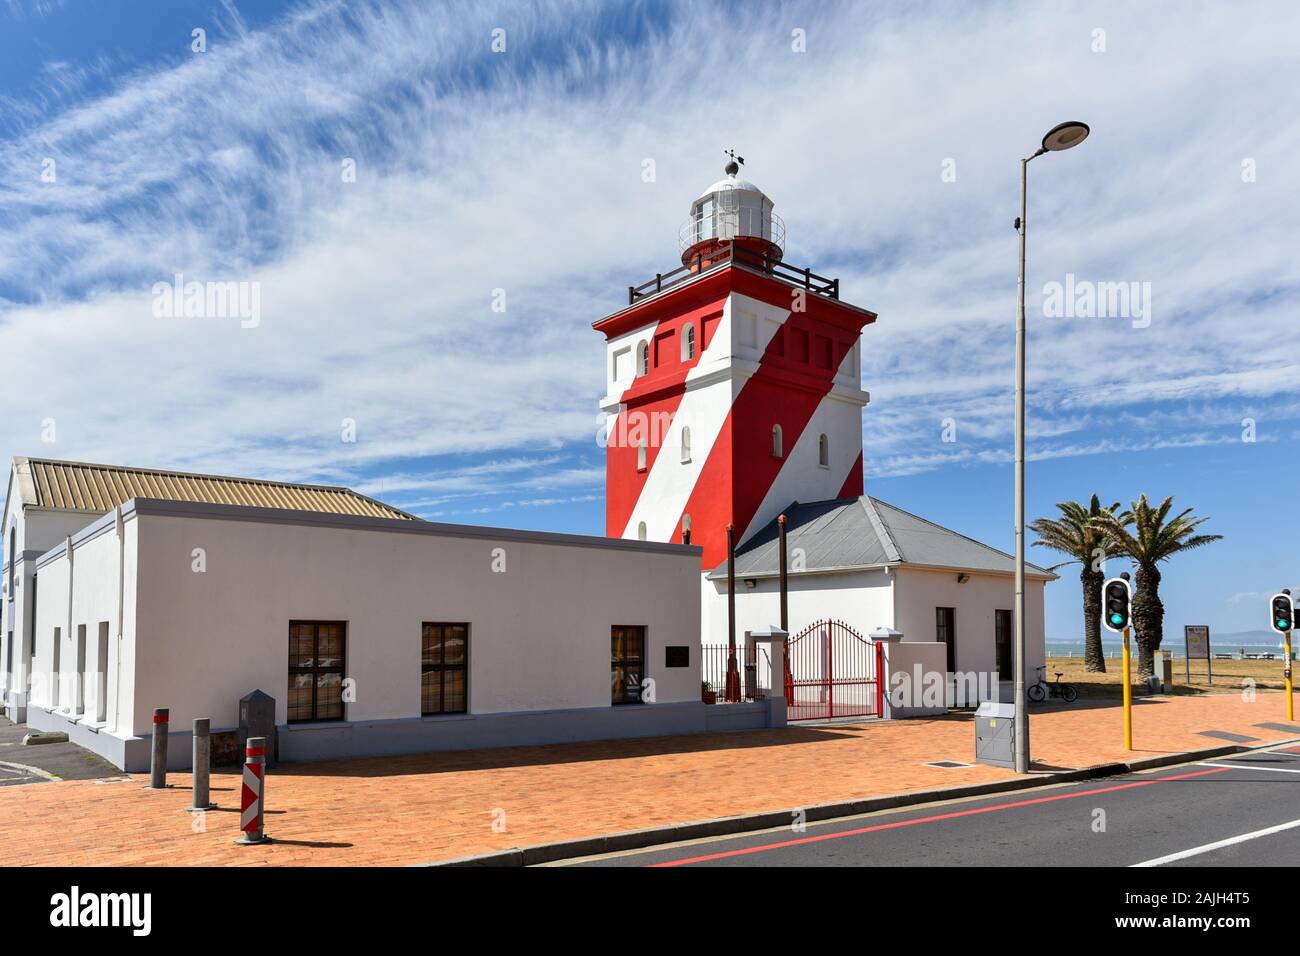 The Green Point Lighthouse in Mouille Point is the oldest operational lighthouse built in Cape Town (1824), South Africa Stock Photo